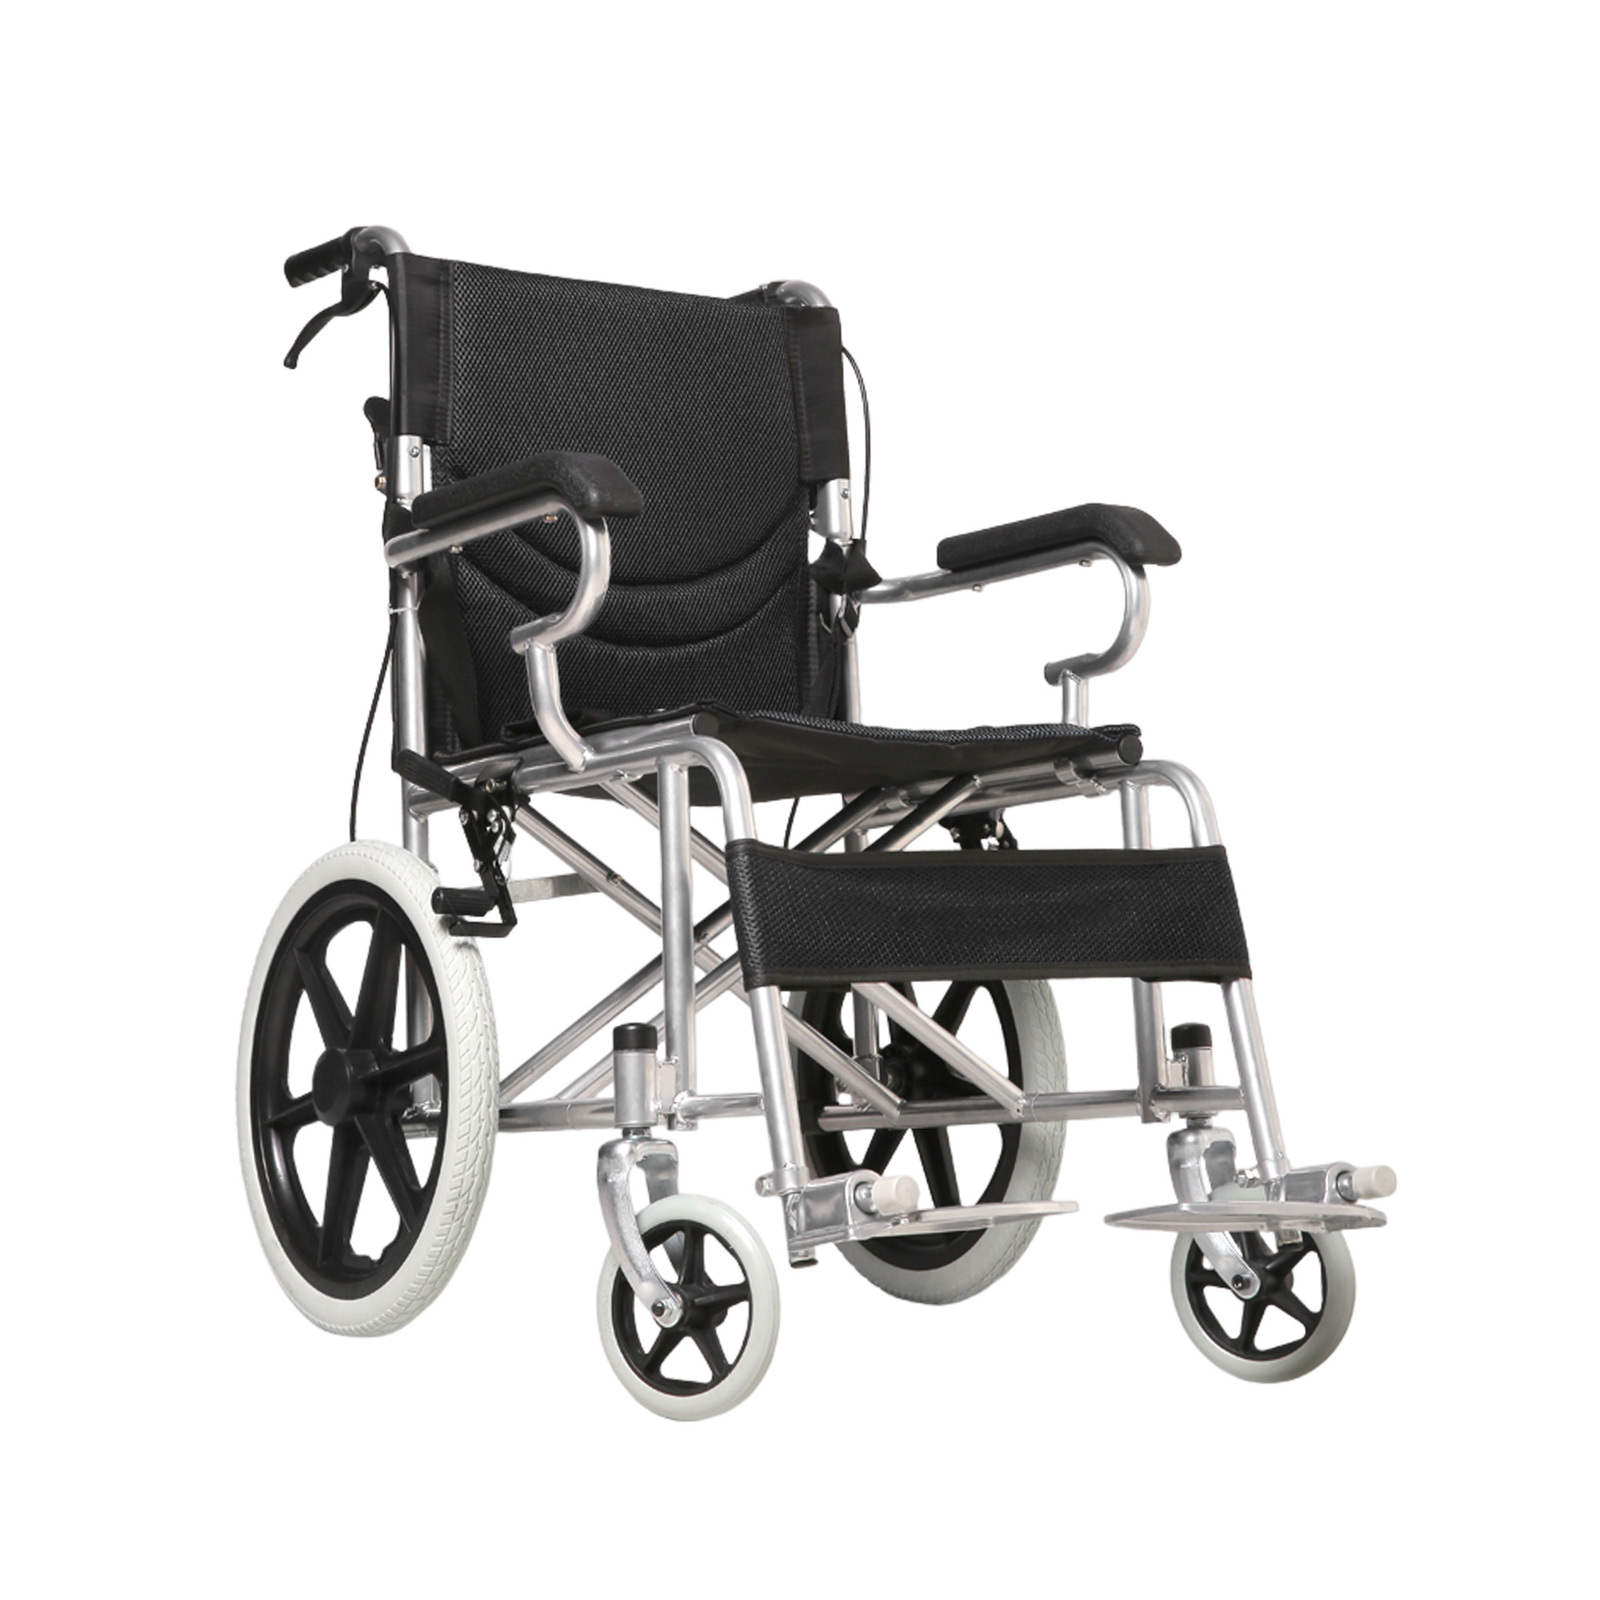 16" Foldable Wheelchair Manual Folding Wheel Chair Portable and Lightweight